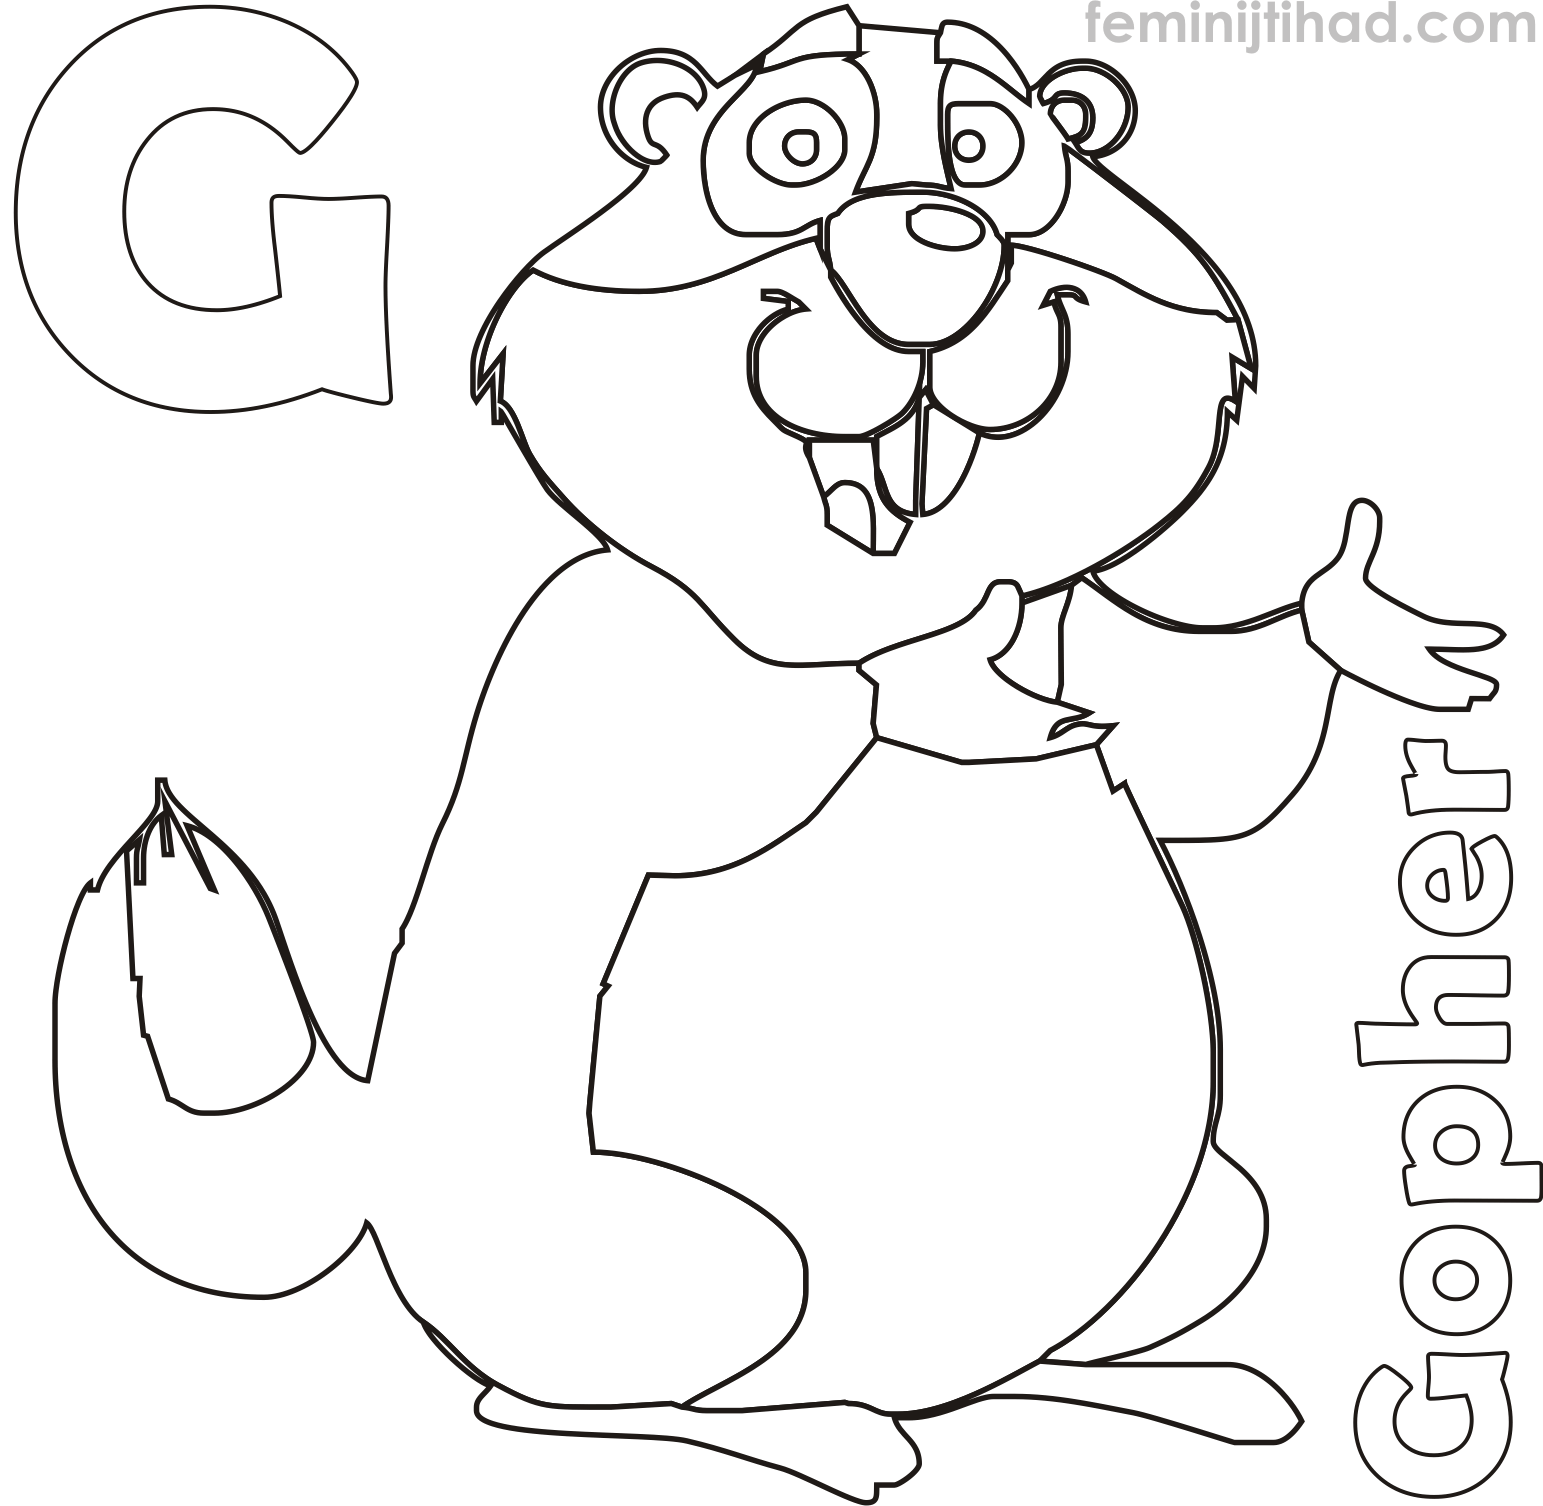 Coloring Gopher Printable